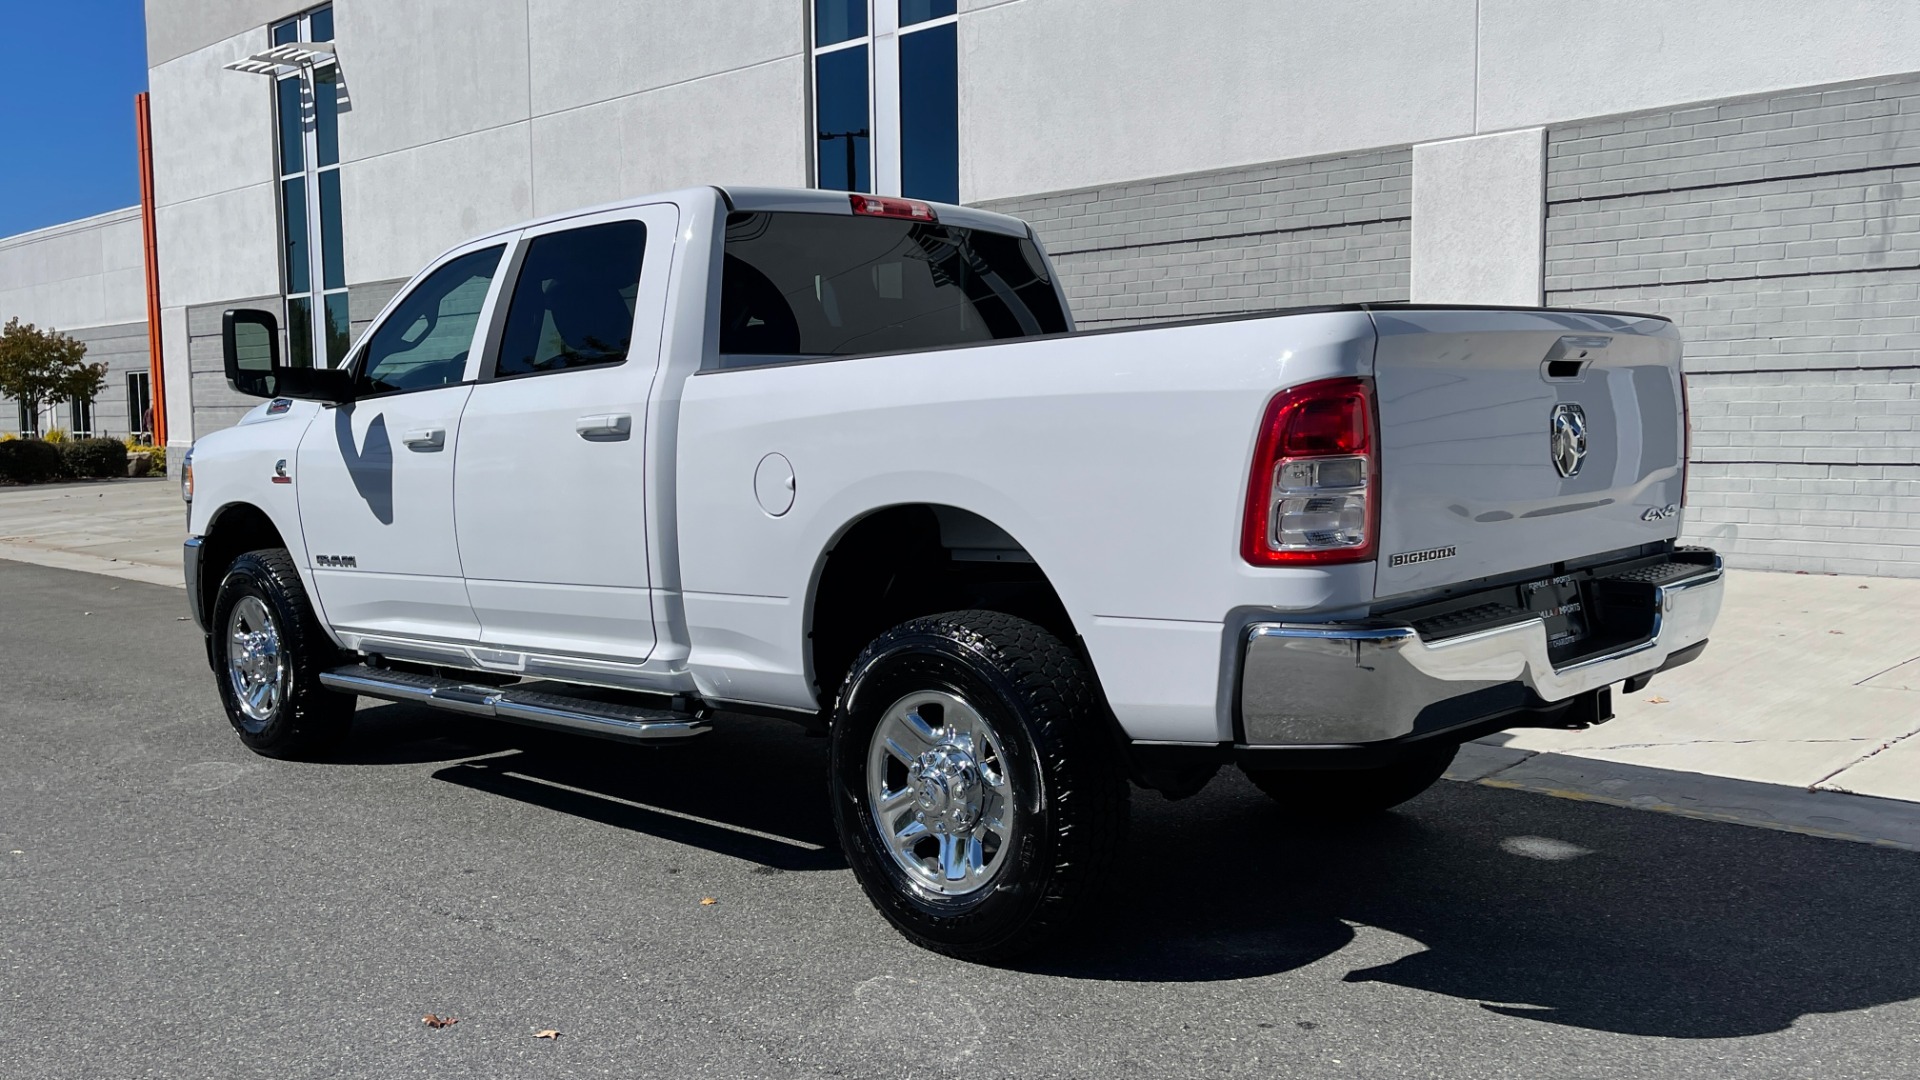 Used 2020 Ram 2500 BIG HORN / 6.7 CUMMINS DIESEL / CREW CAB / 4WD / SIDE STEPS for sale $54,995 at Formula Imports in Charlotte NC 28227 7